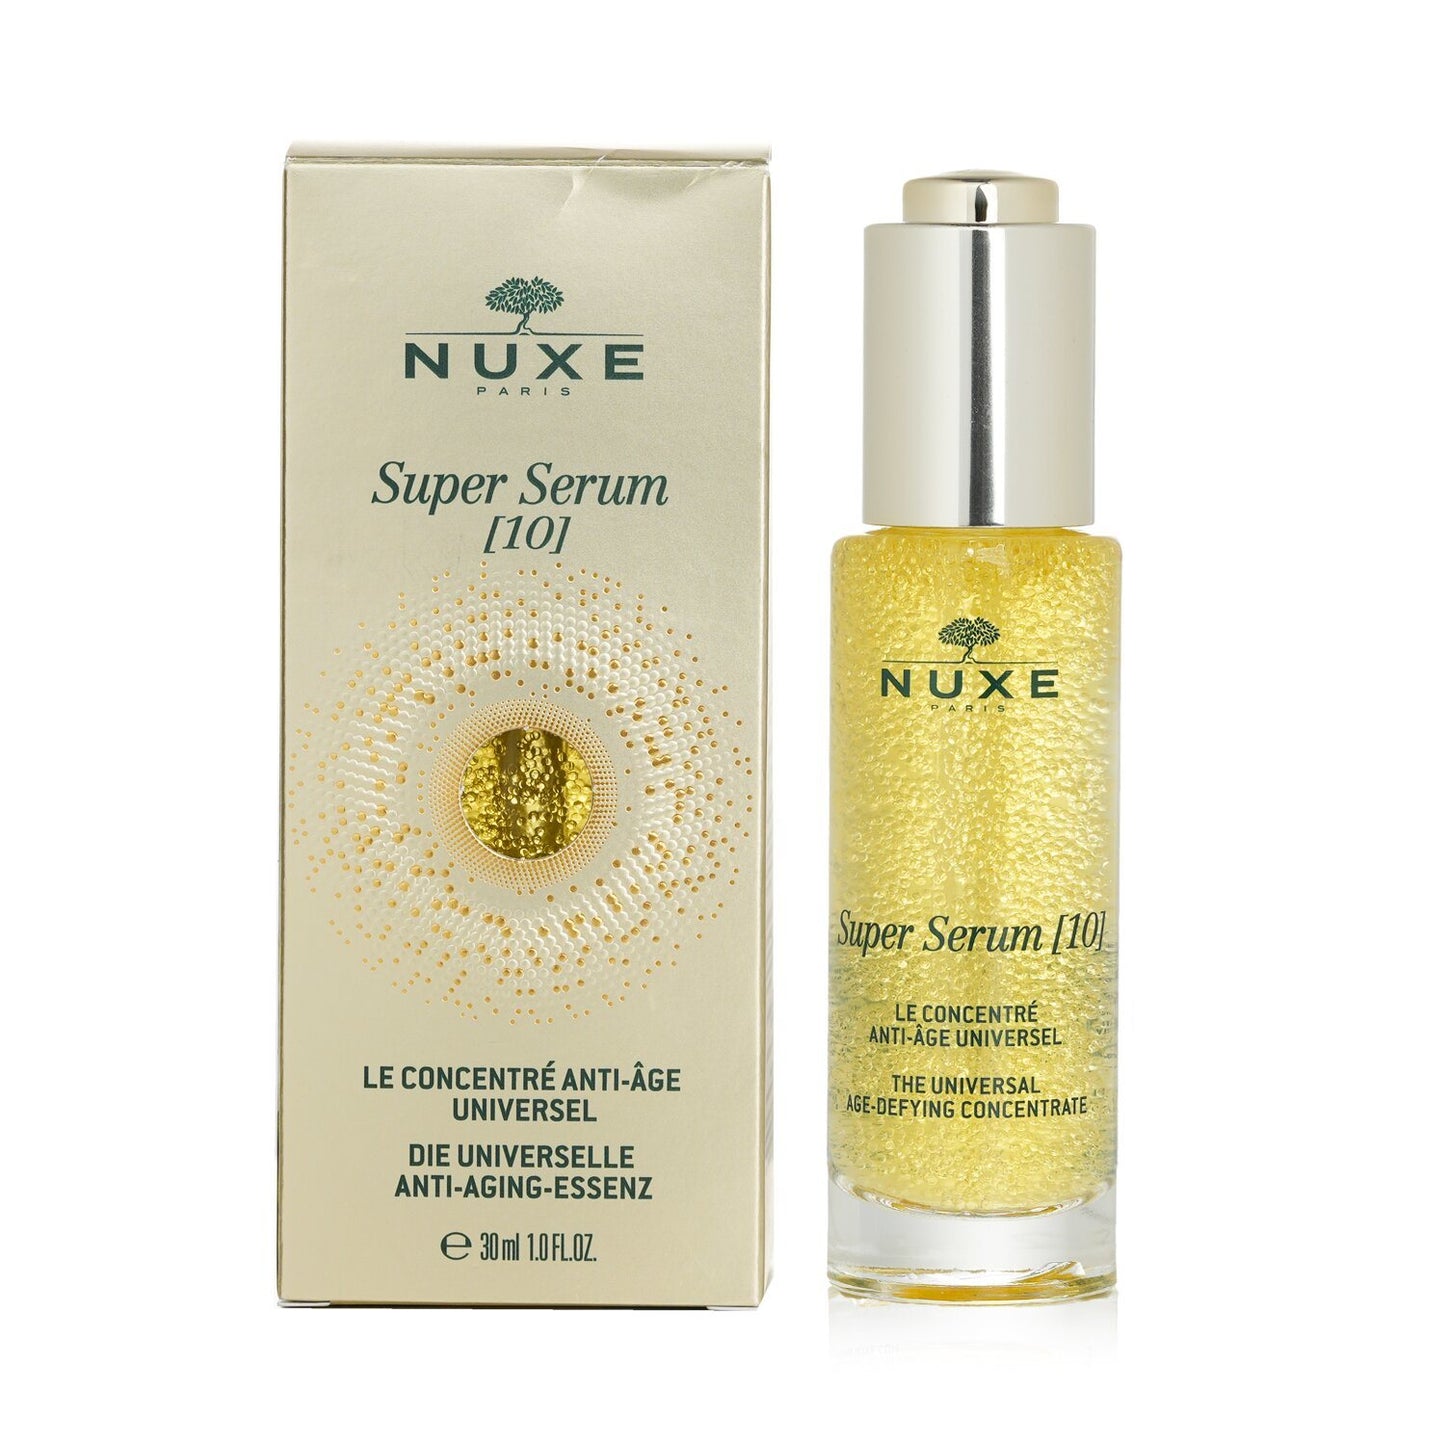 NUXE - Super Serum [10] - The Universal Age-Defying Concenrate 023323 30ml/1oz - lolaluxeshop